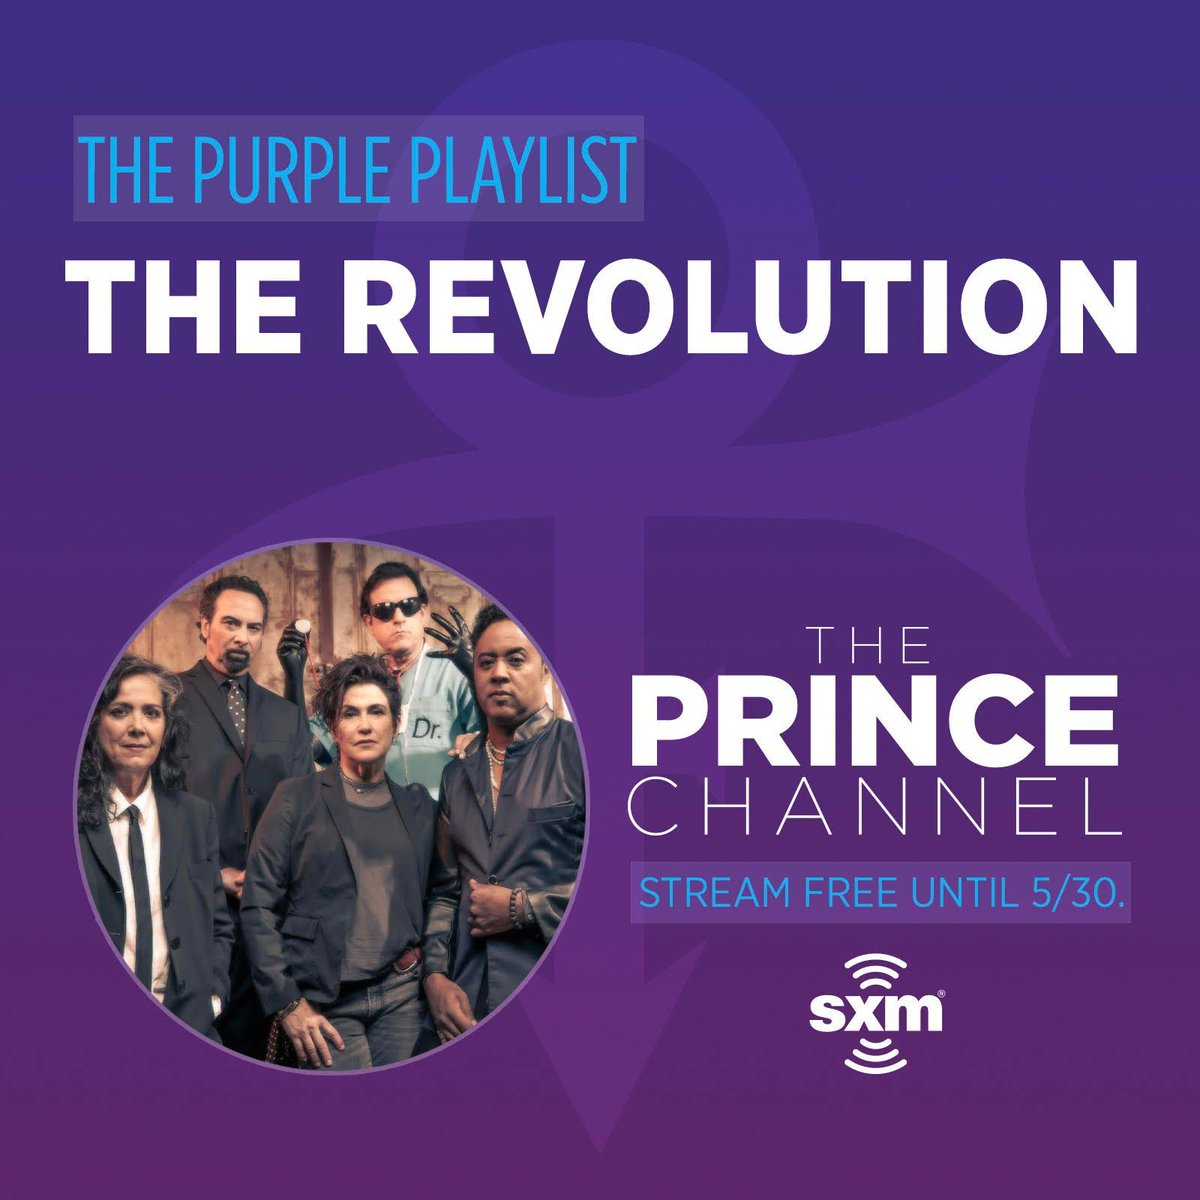 Hey everyone! This is Bobby Z from the Revolution. My Purple Playlist is now available for free on SiriusXM. Listen now for free until 5/30! siriusxm.us/TheRevolution